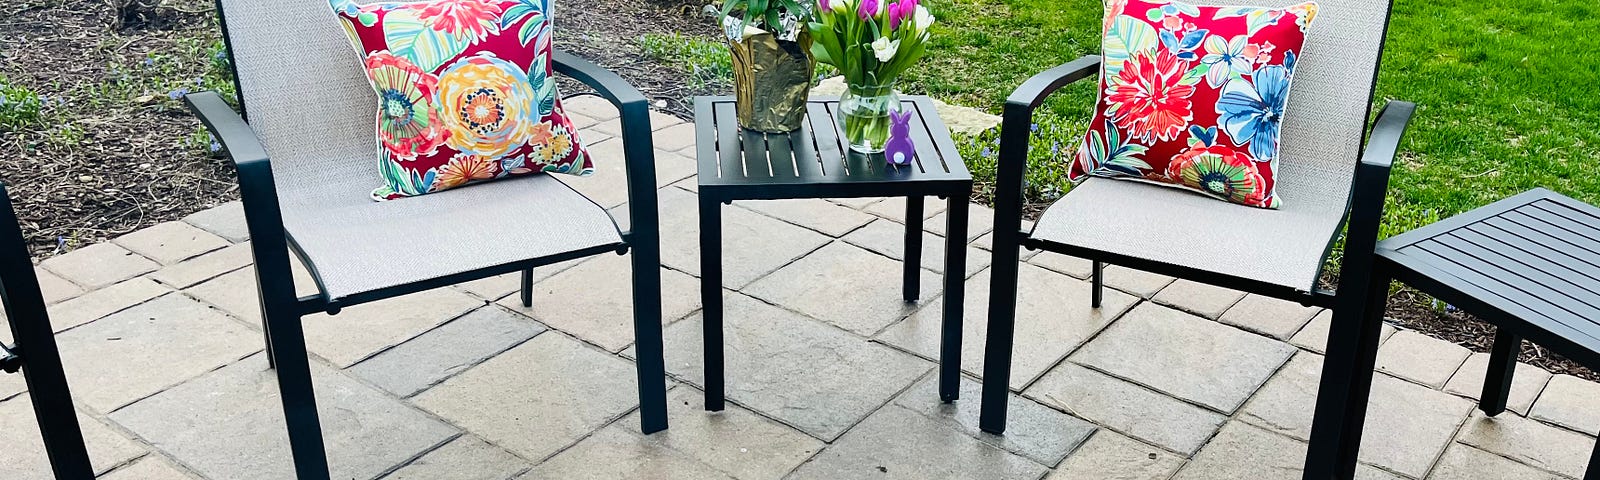 Author patio on Easter, tulips and lilies displayed before a firepit.